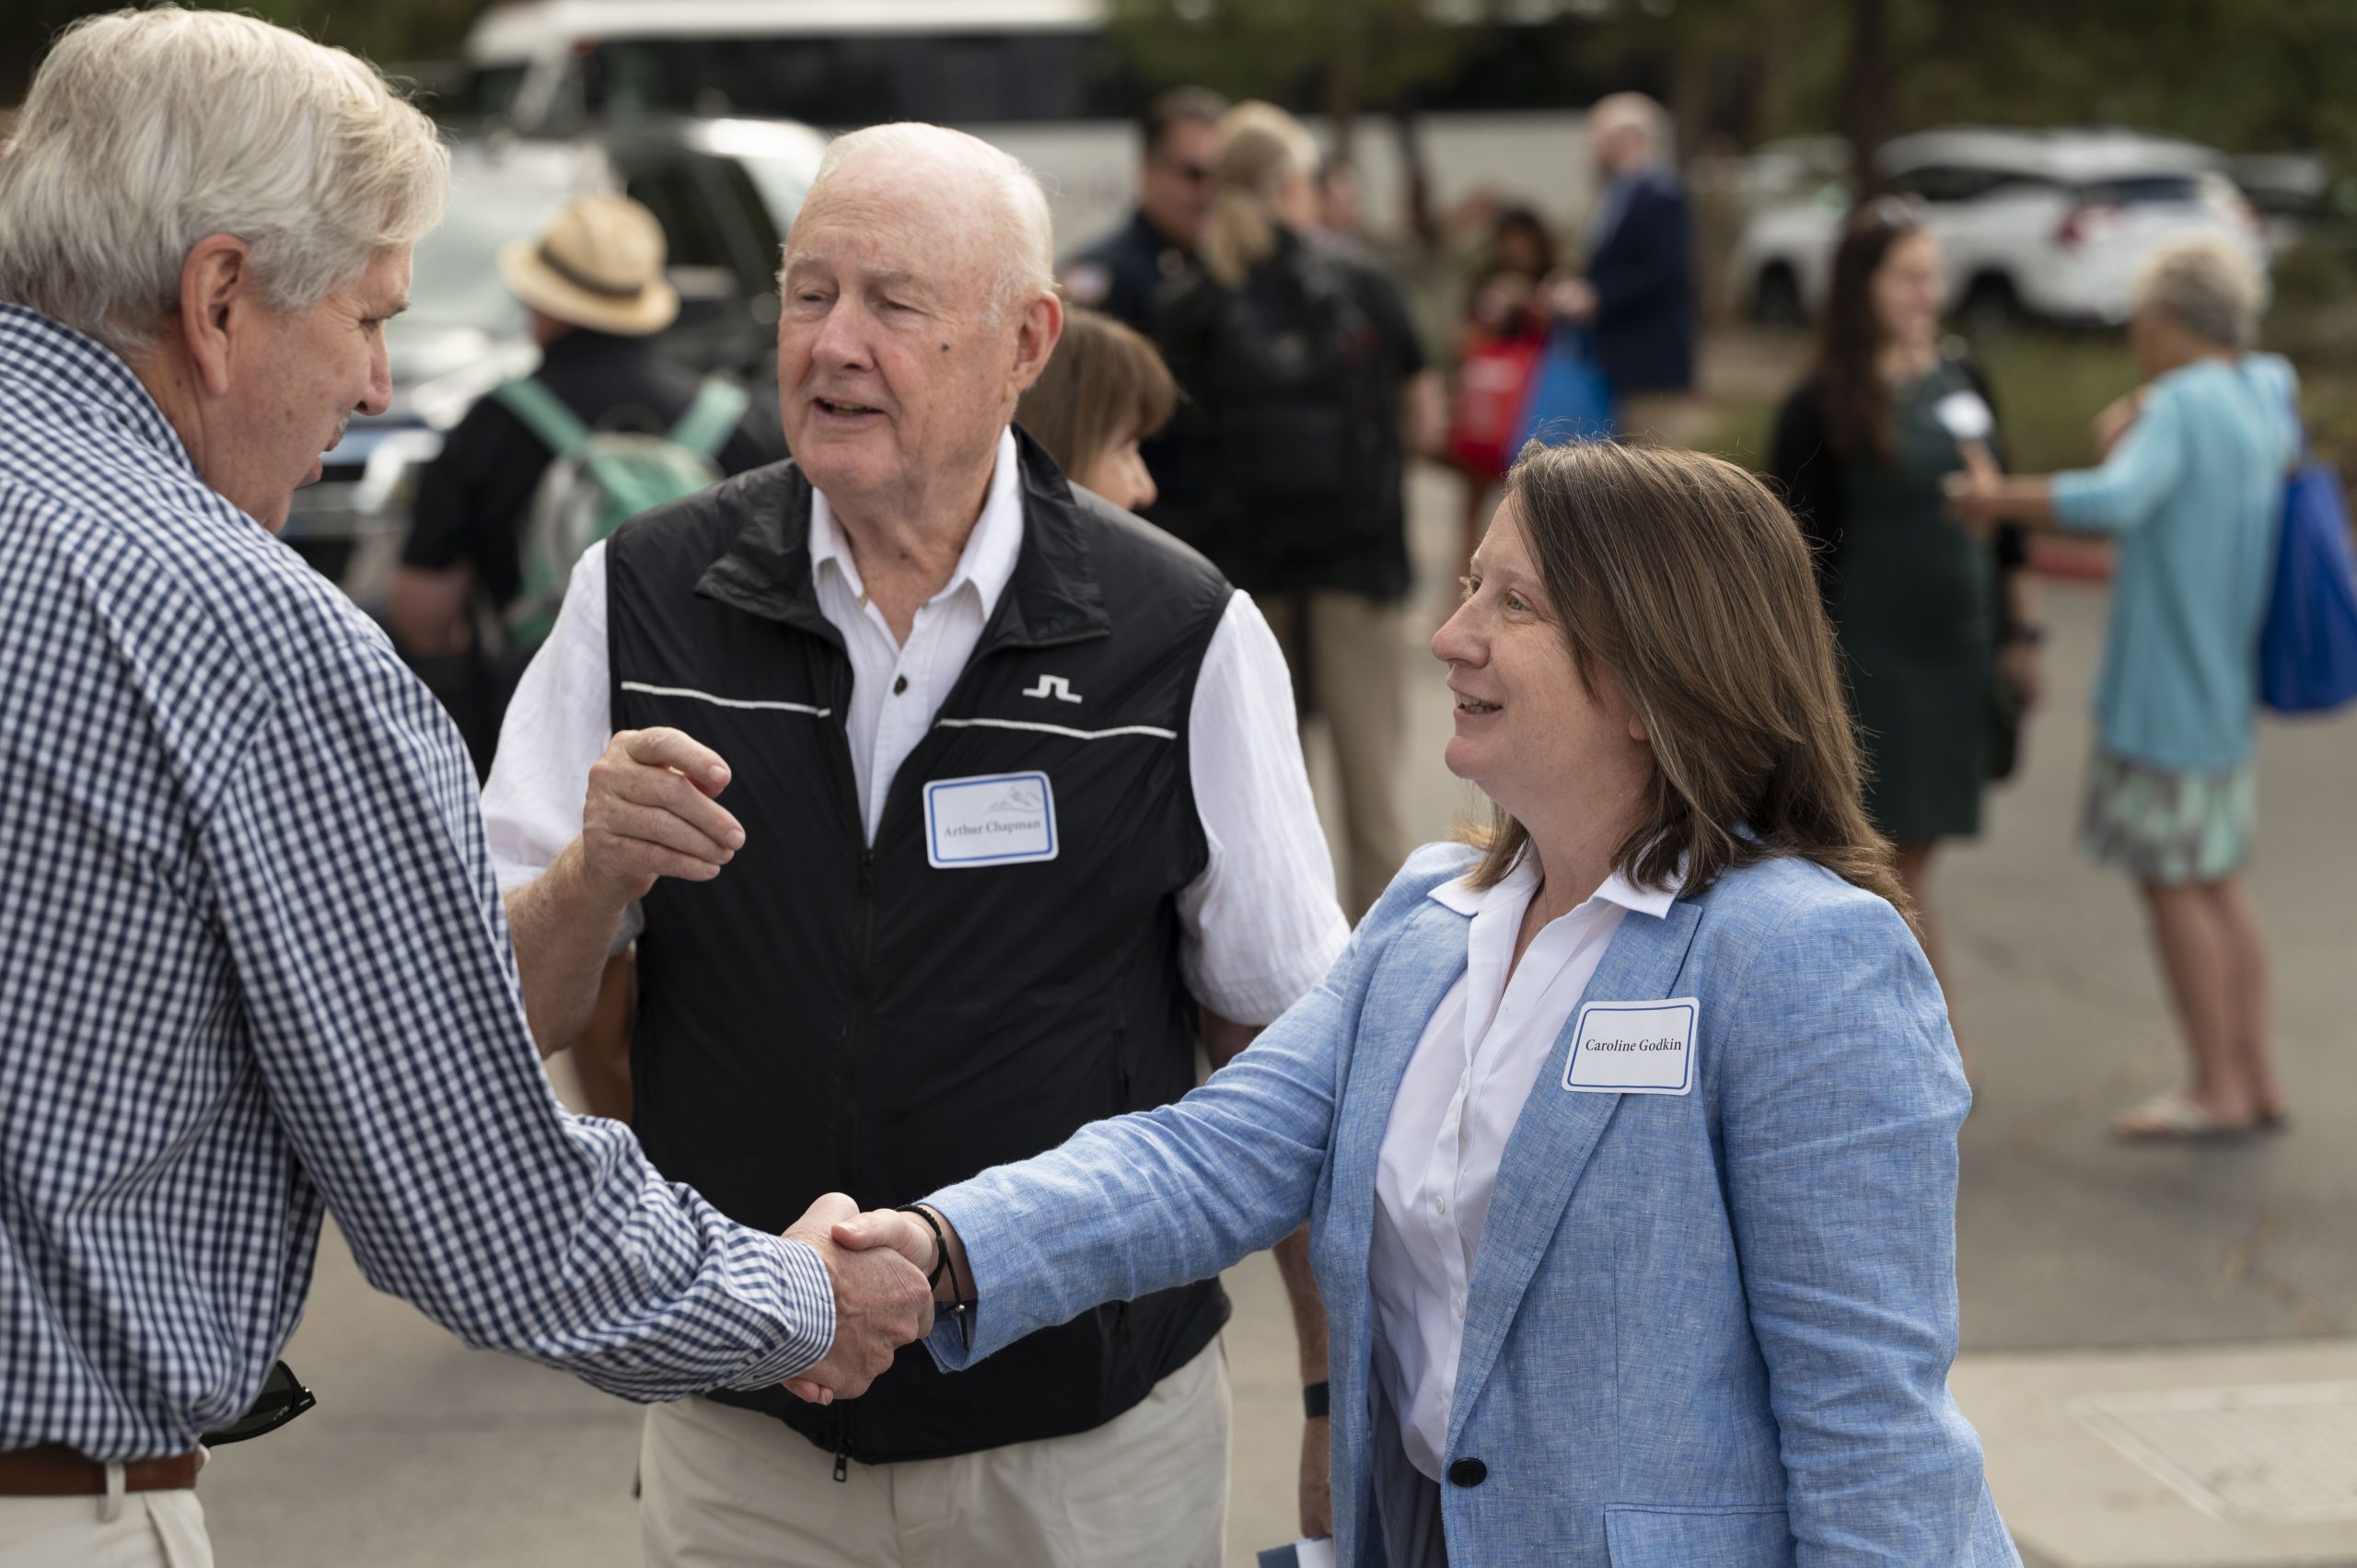 CWI Director Caroline Godkin shakes hands with other attendees at the Tahoe Summit in August.